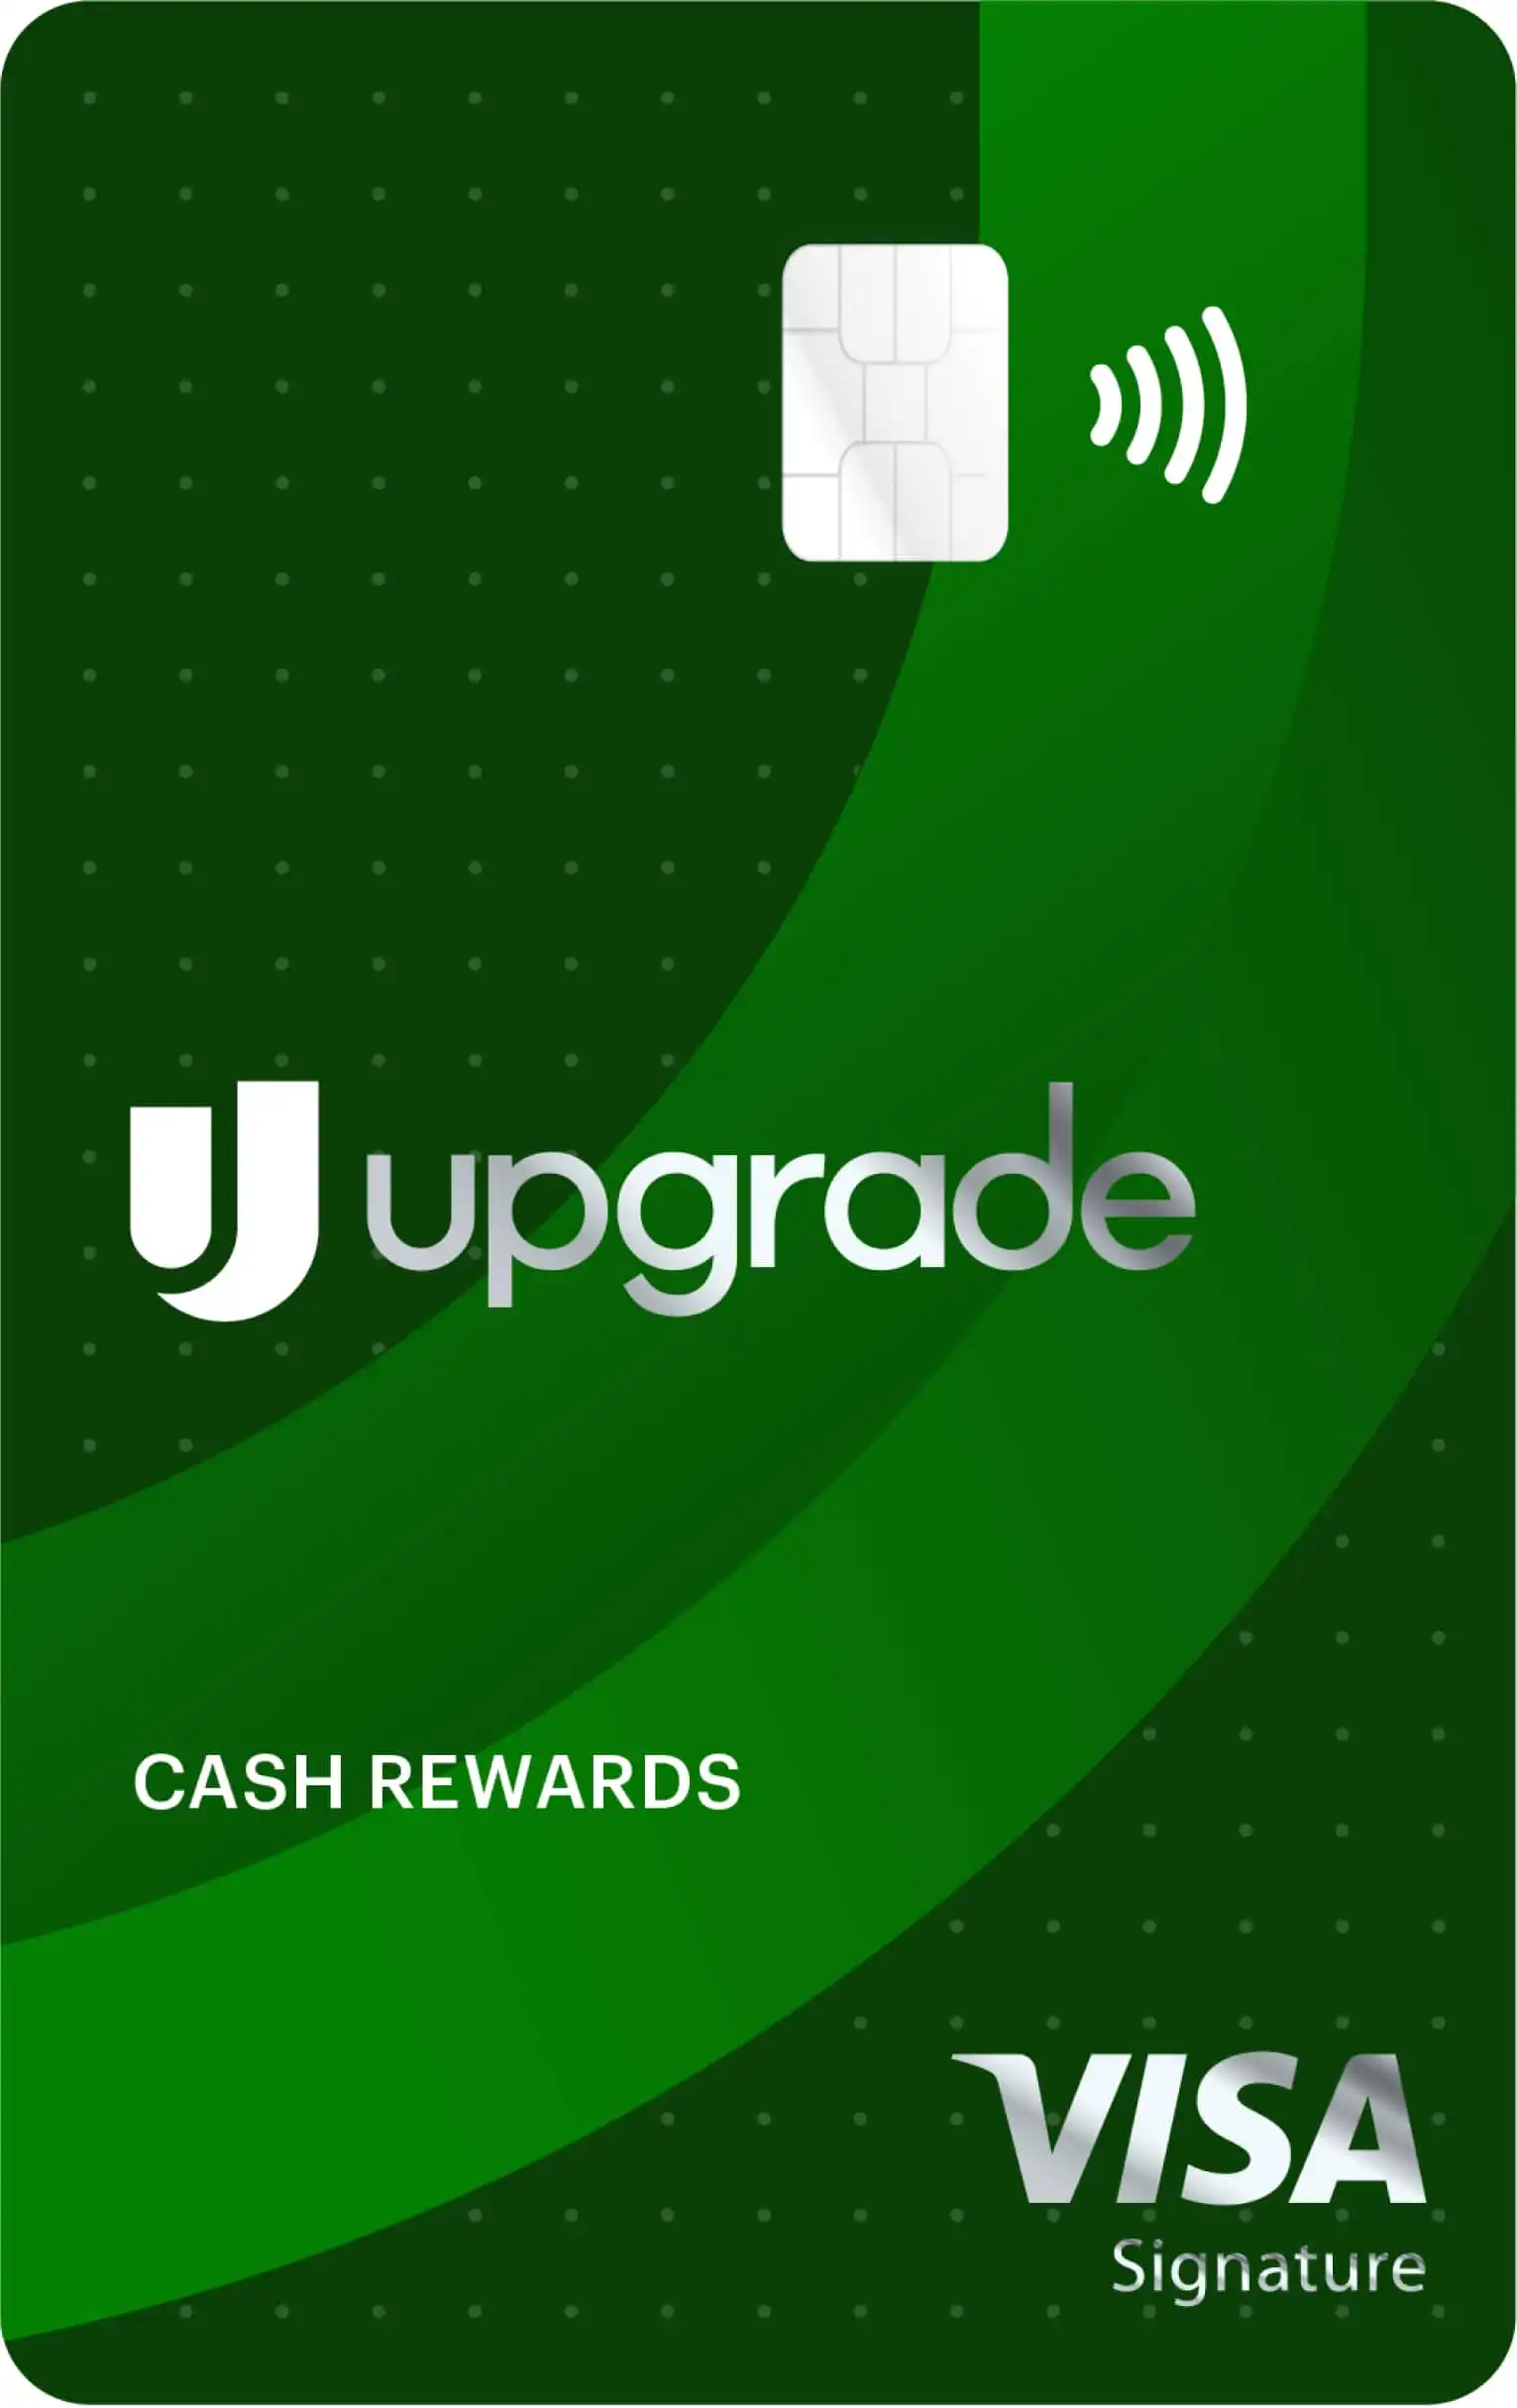 Upgrade Card | Credit Card Lines from $500 to $25,000